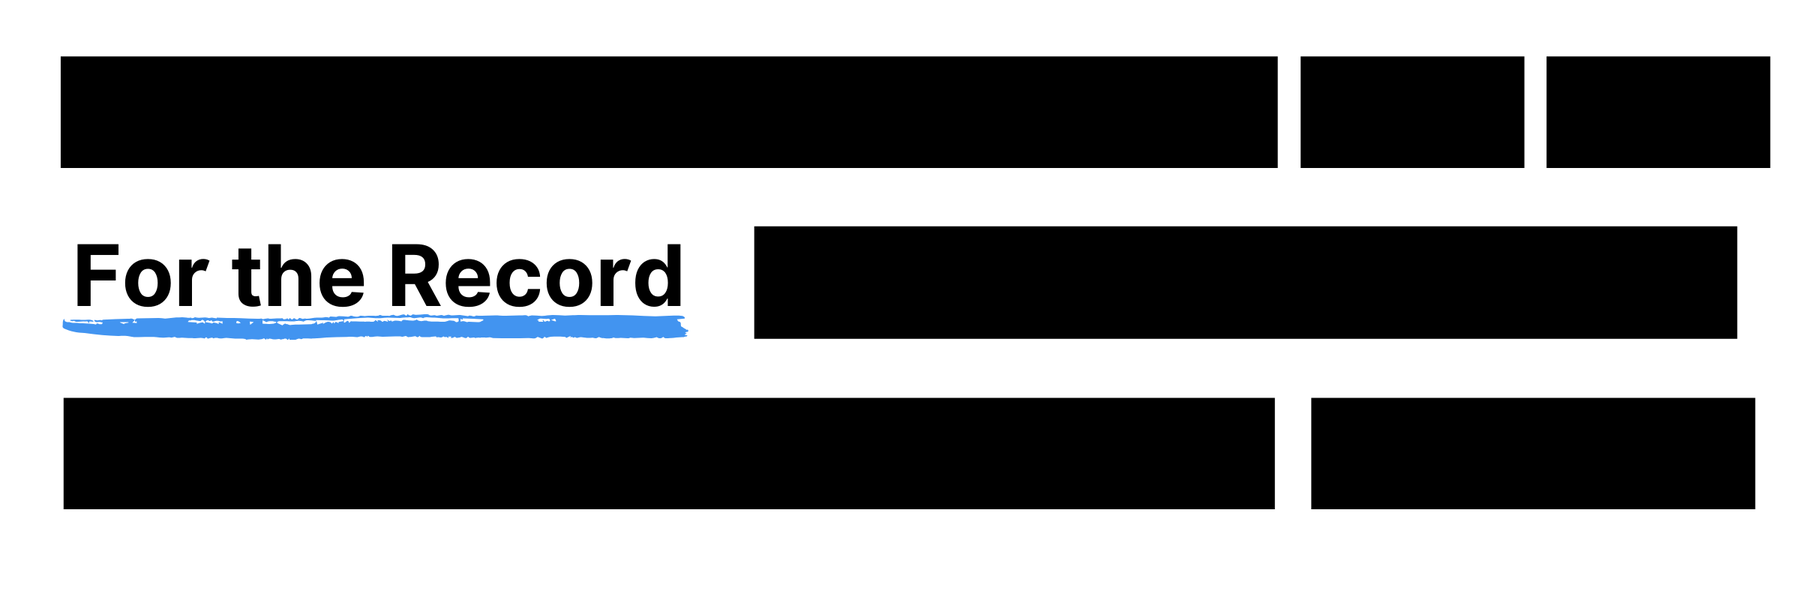 Black redaction bars on a white background with the words For the Record